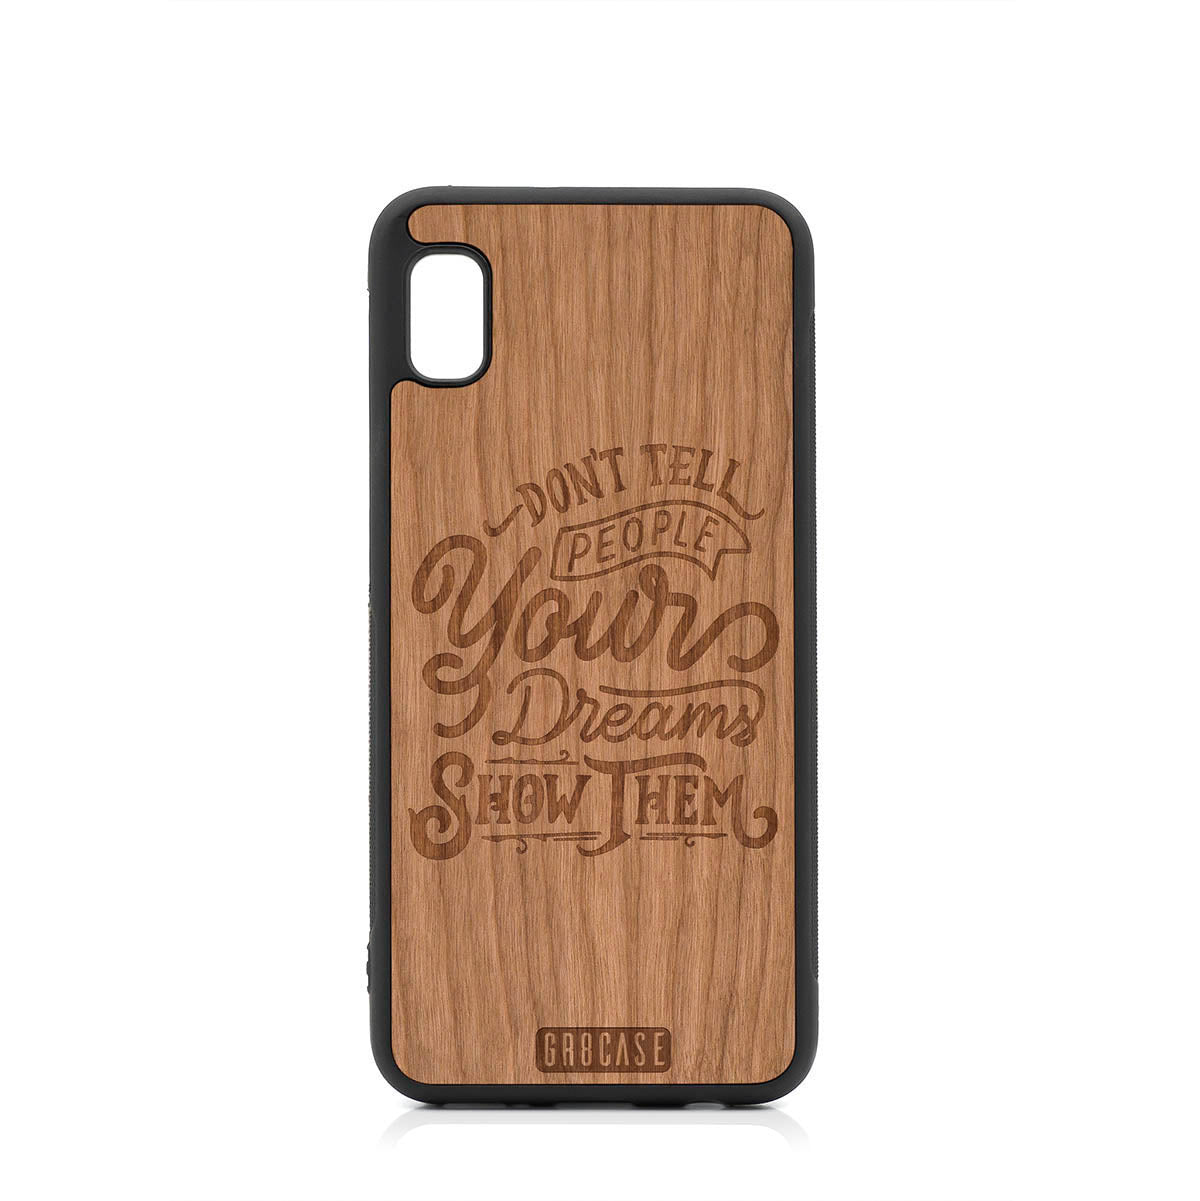 Don't Tell People Your Dreams Show Them Design Wood Case For Samsung Galaxy A10E by GR8CASE